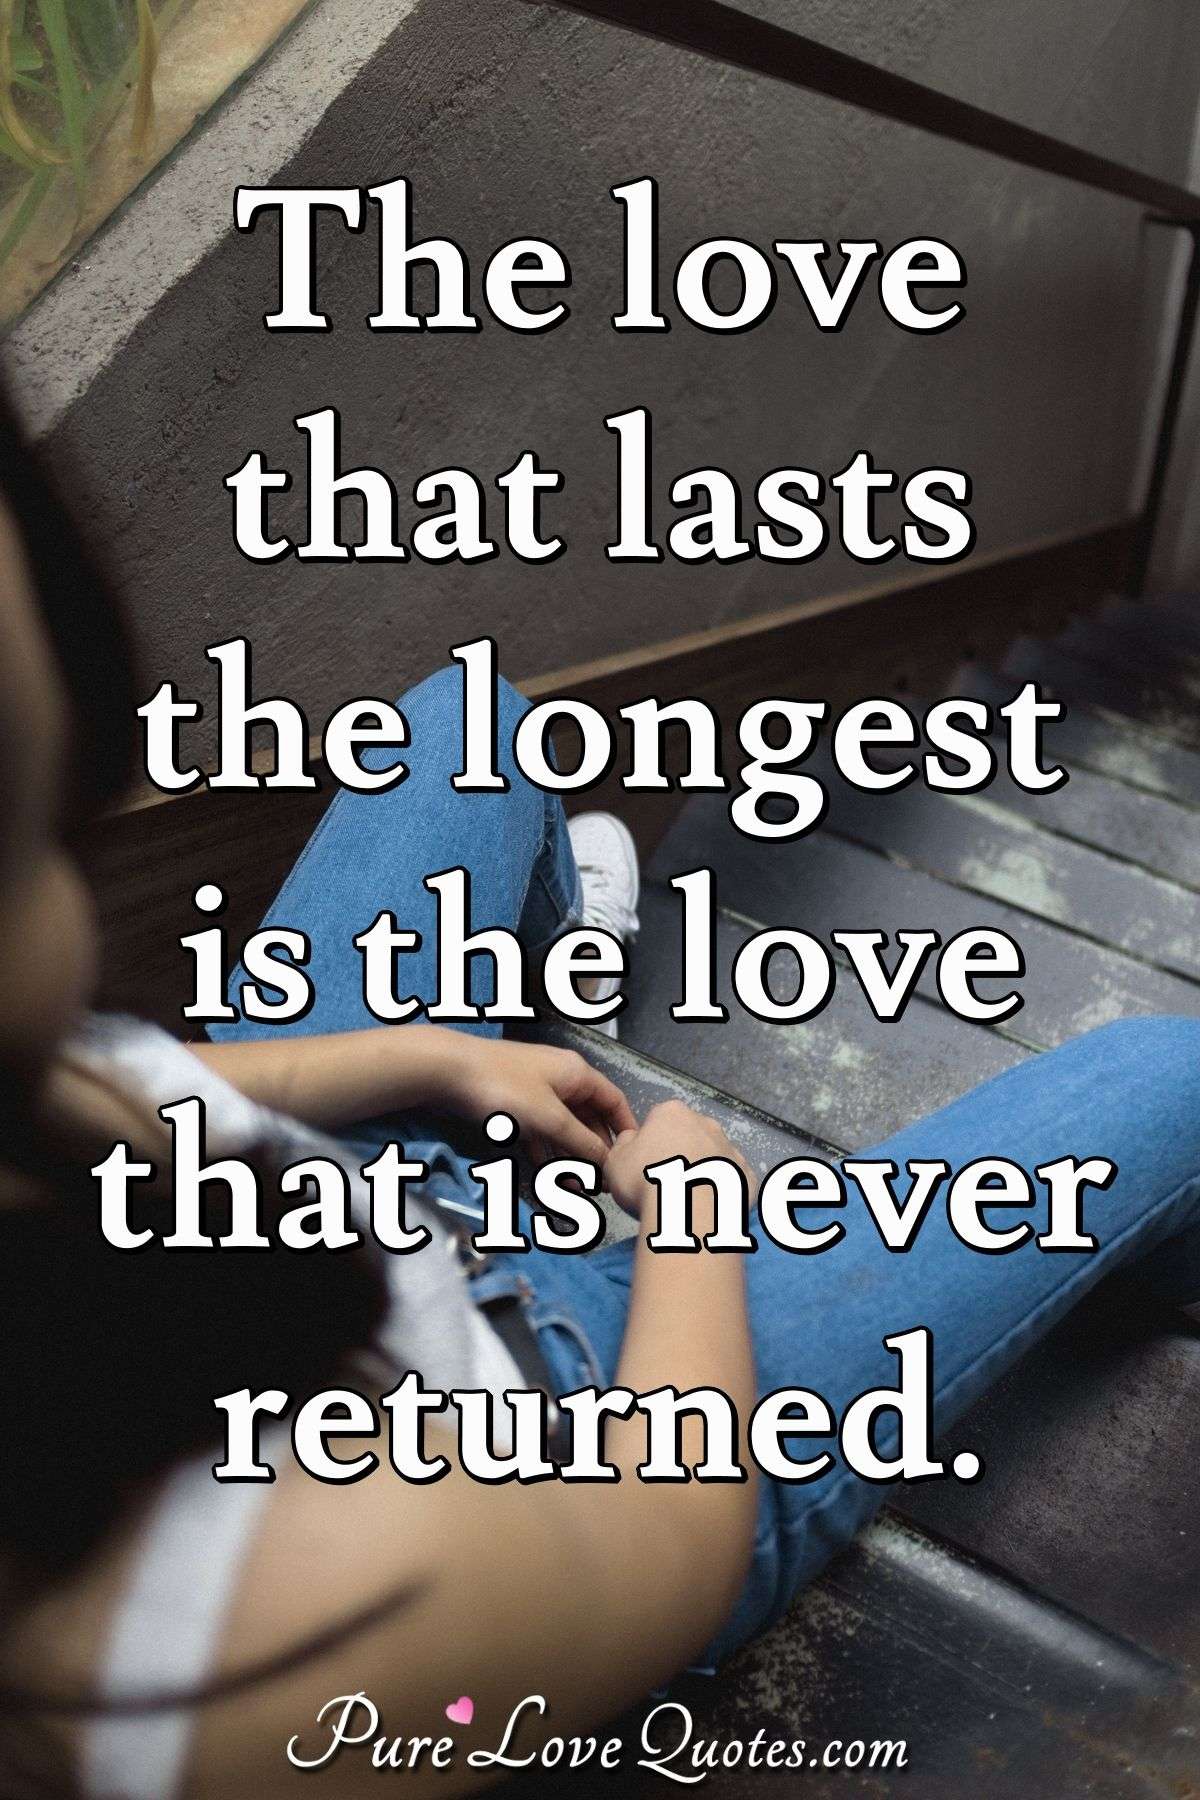 The love that lasts the longest is the love that is never returned. - William Somerset Maugham